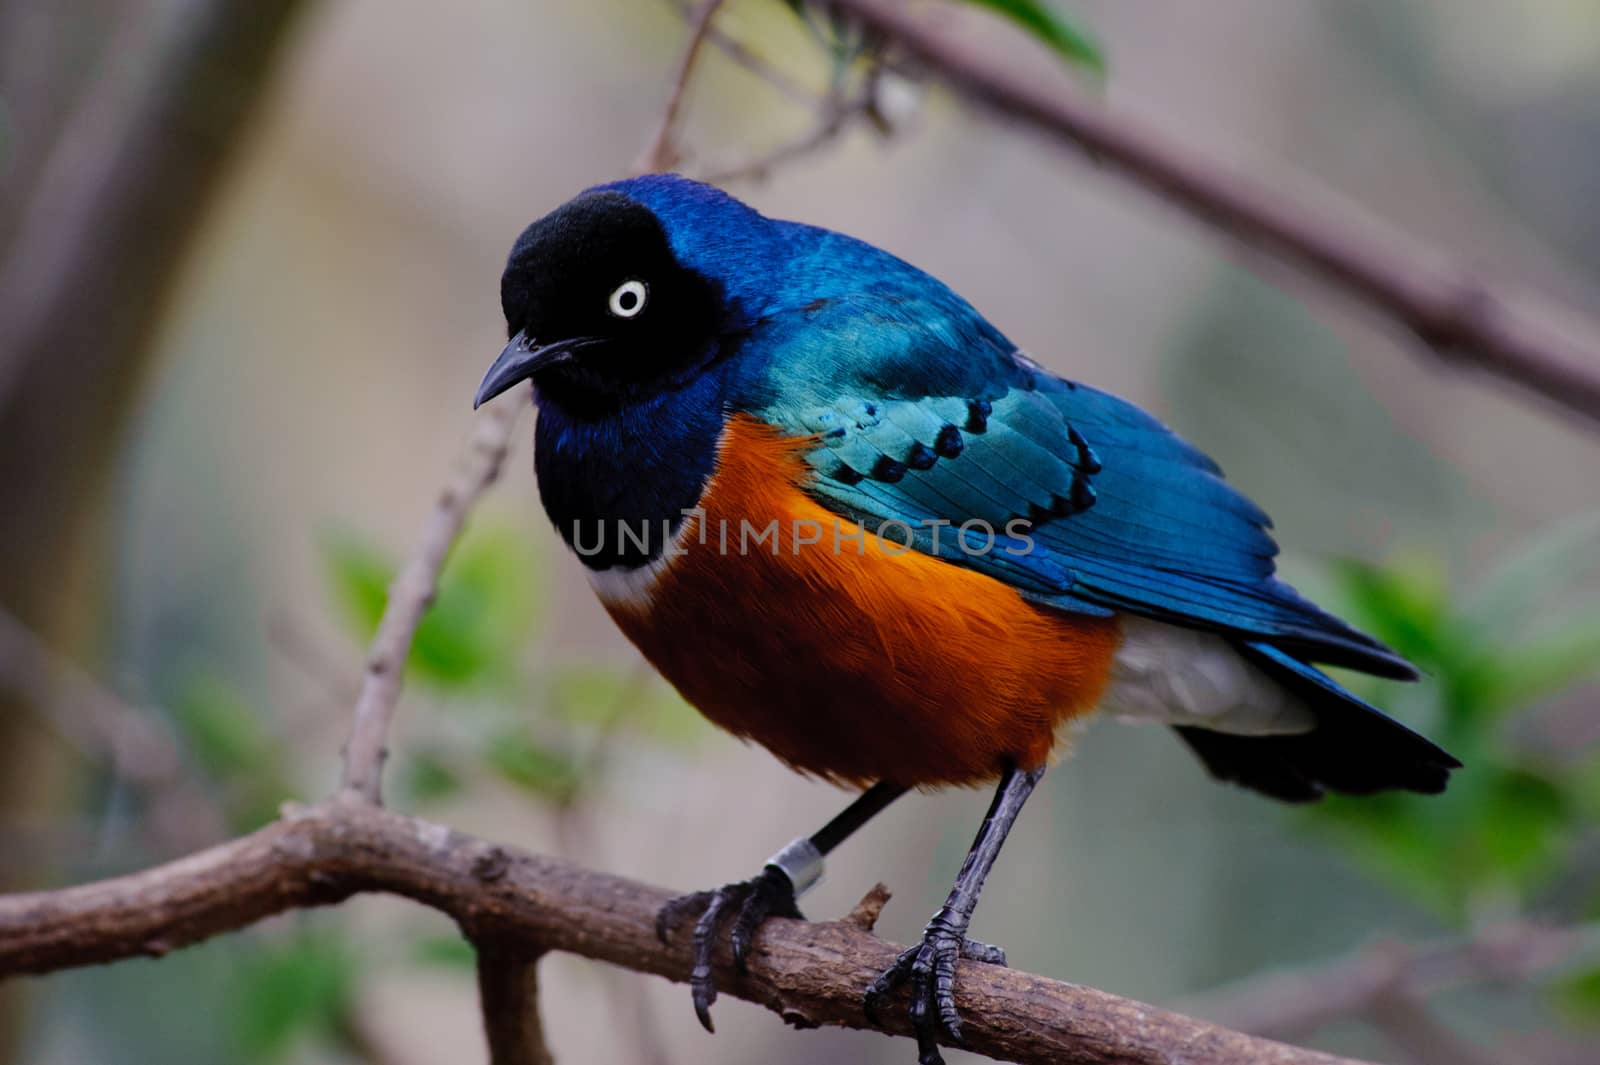 Superb starling by kmwphotography